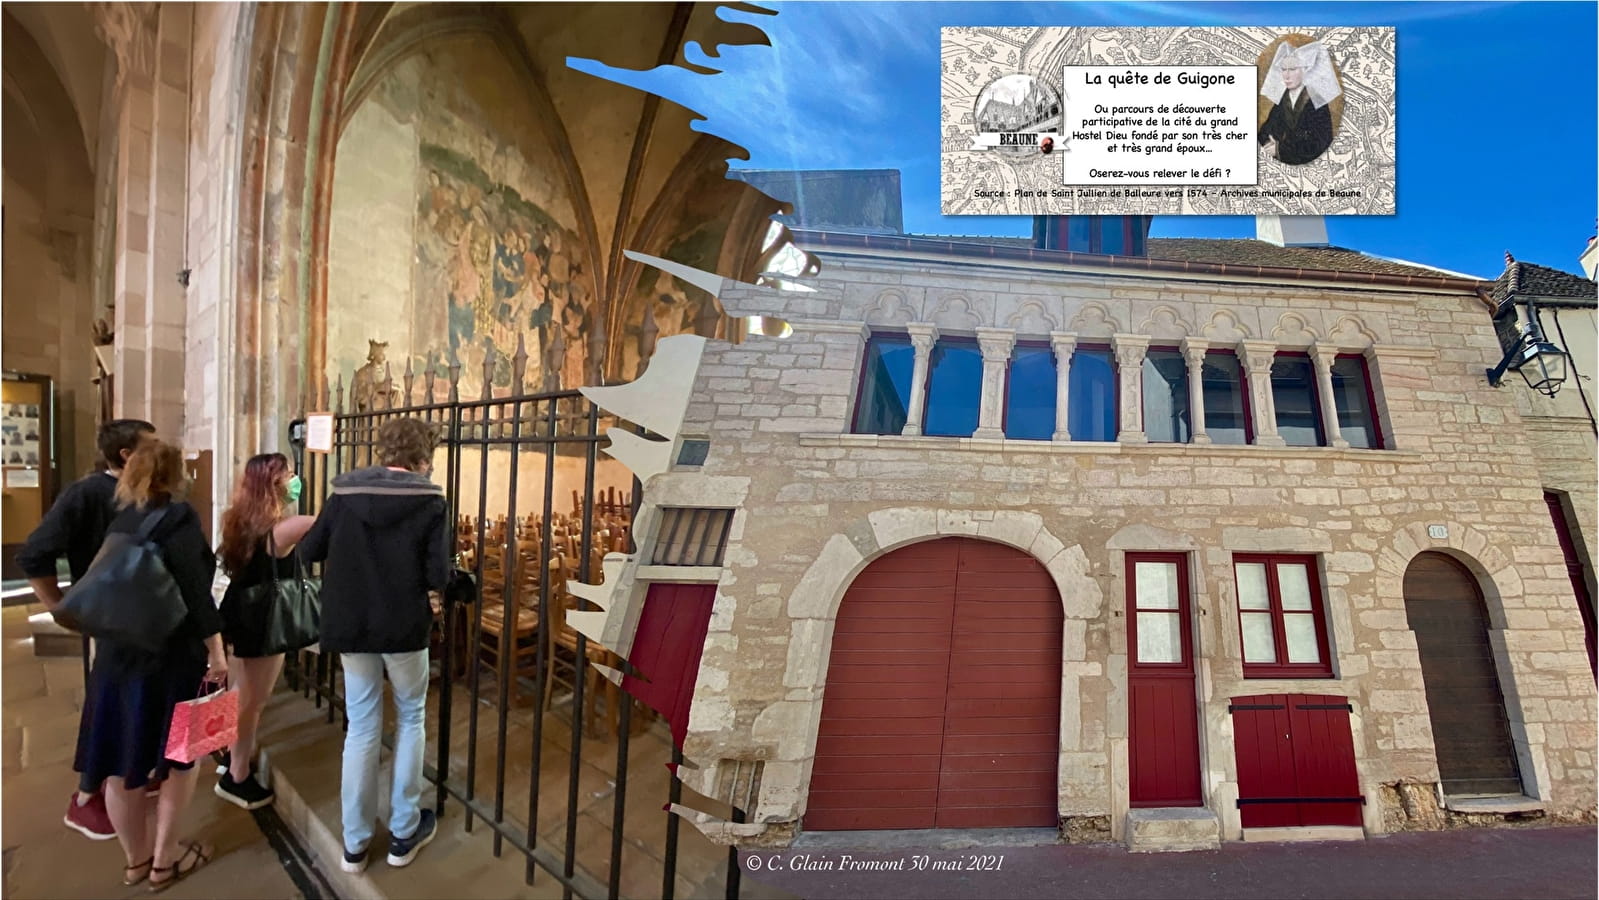 Visit and discover Beaune in the form of a treasure hunt: Guigone's Quest... 